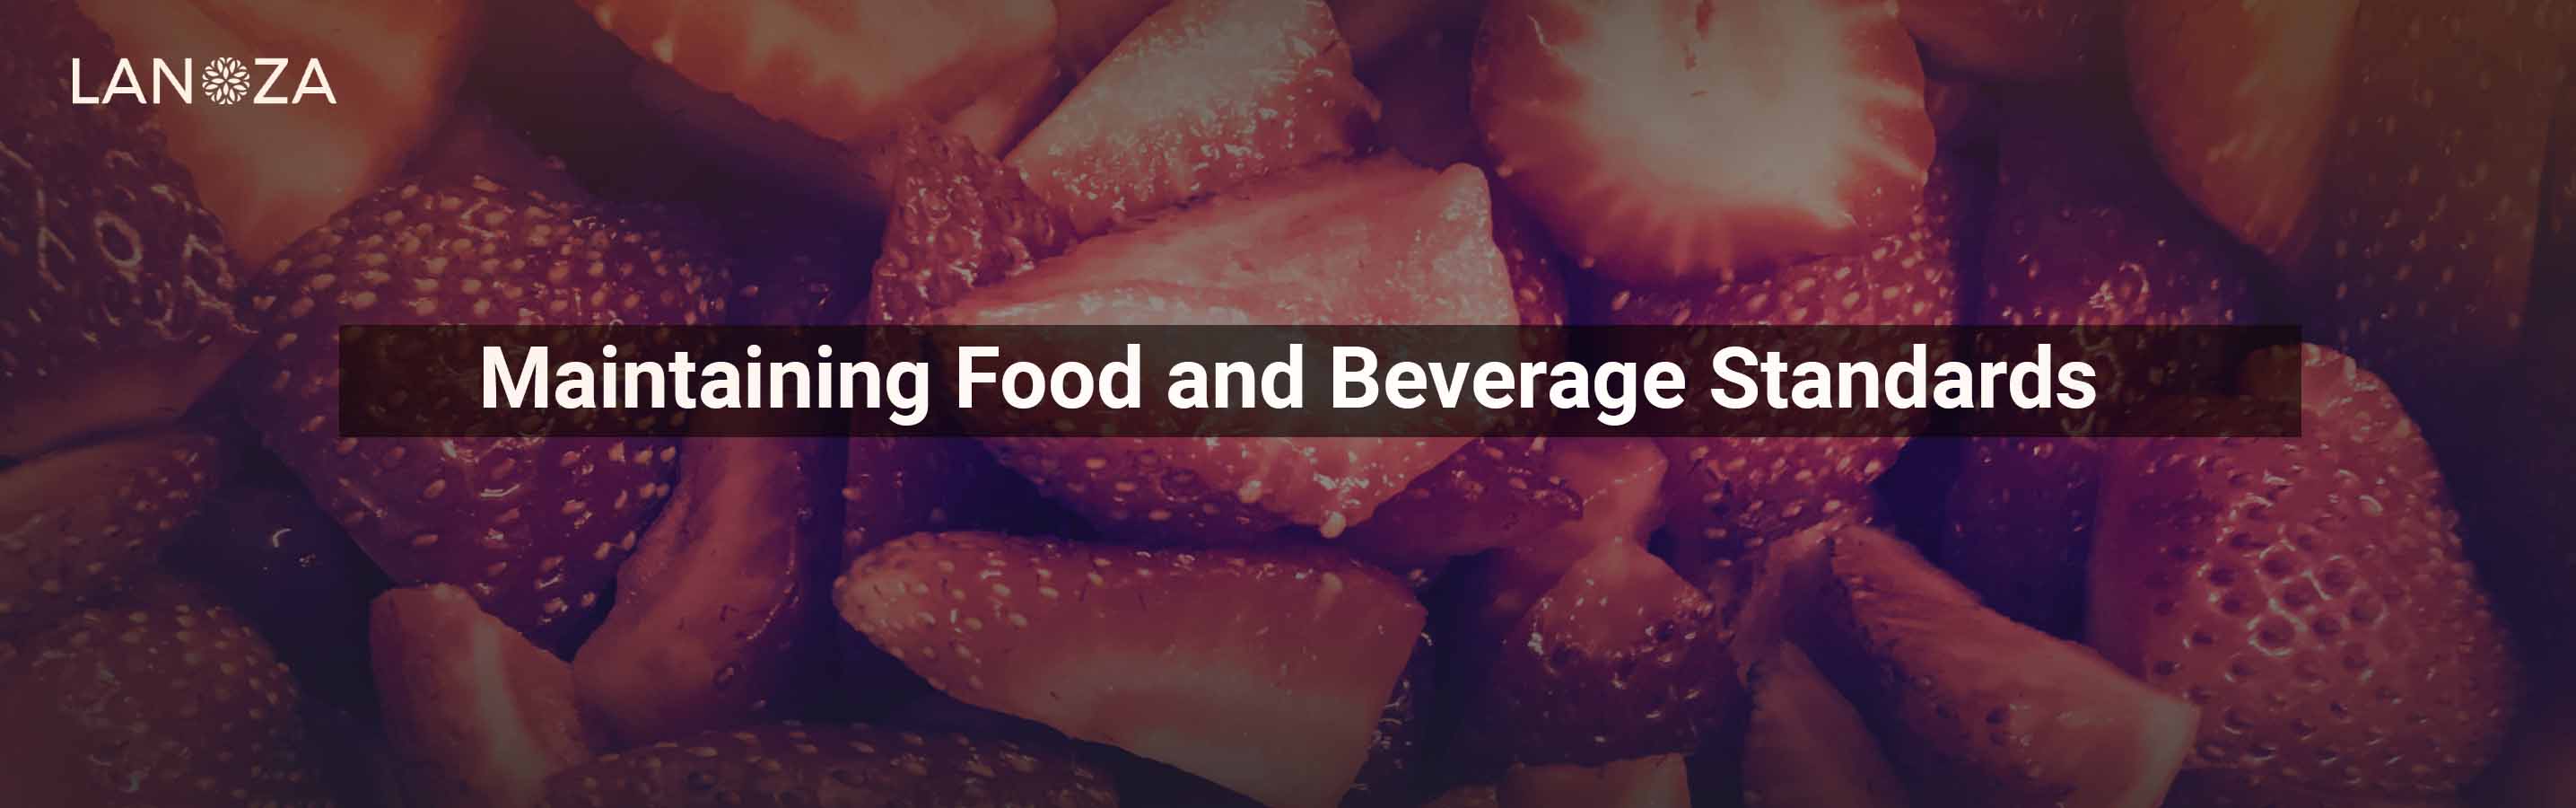 maintaining-food-and-beverage-standards